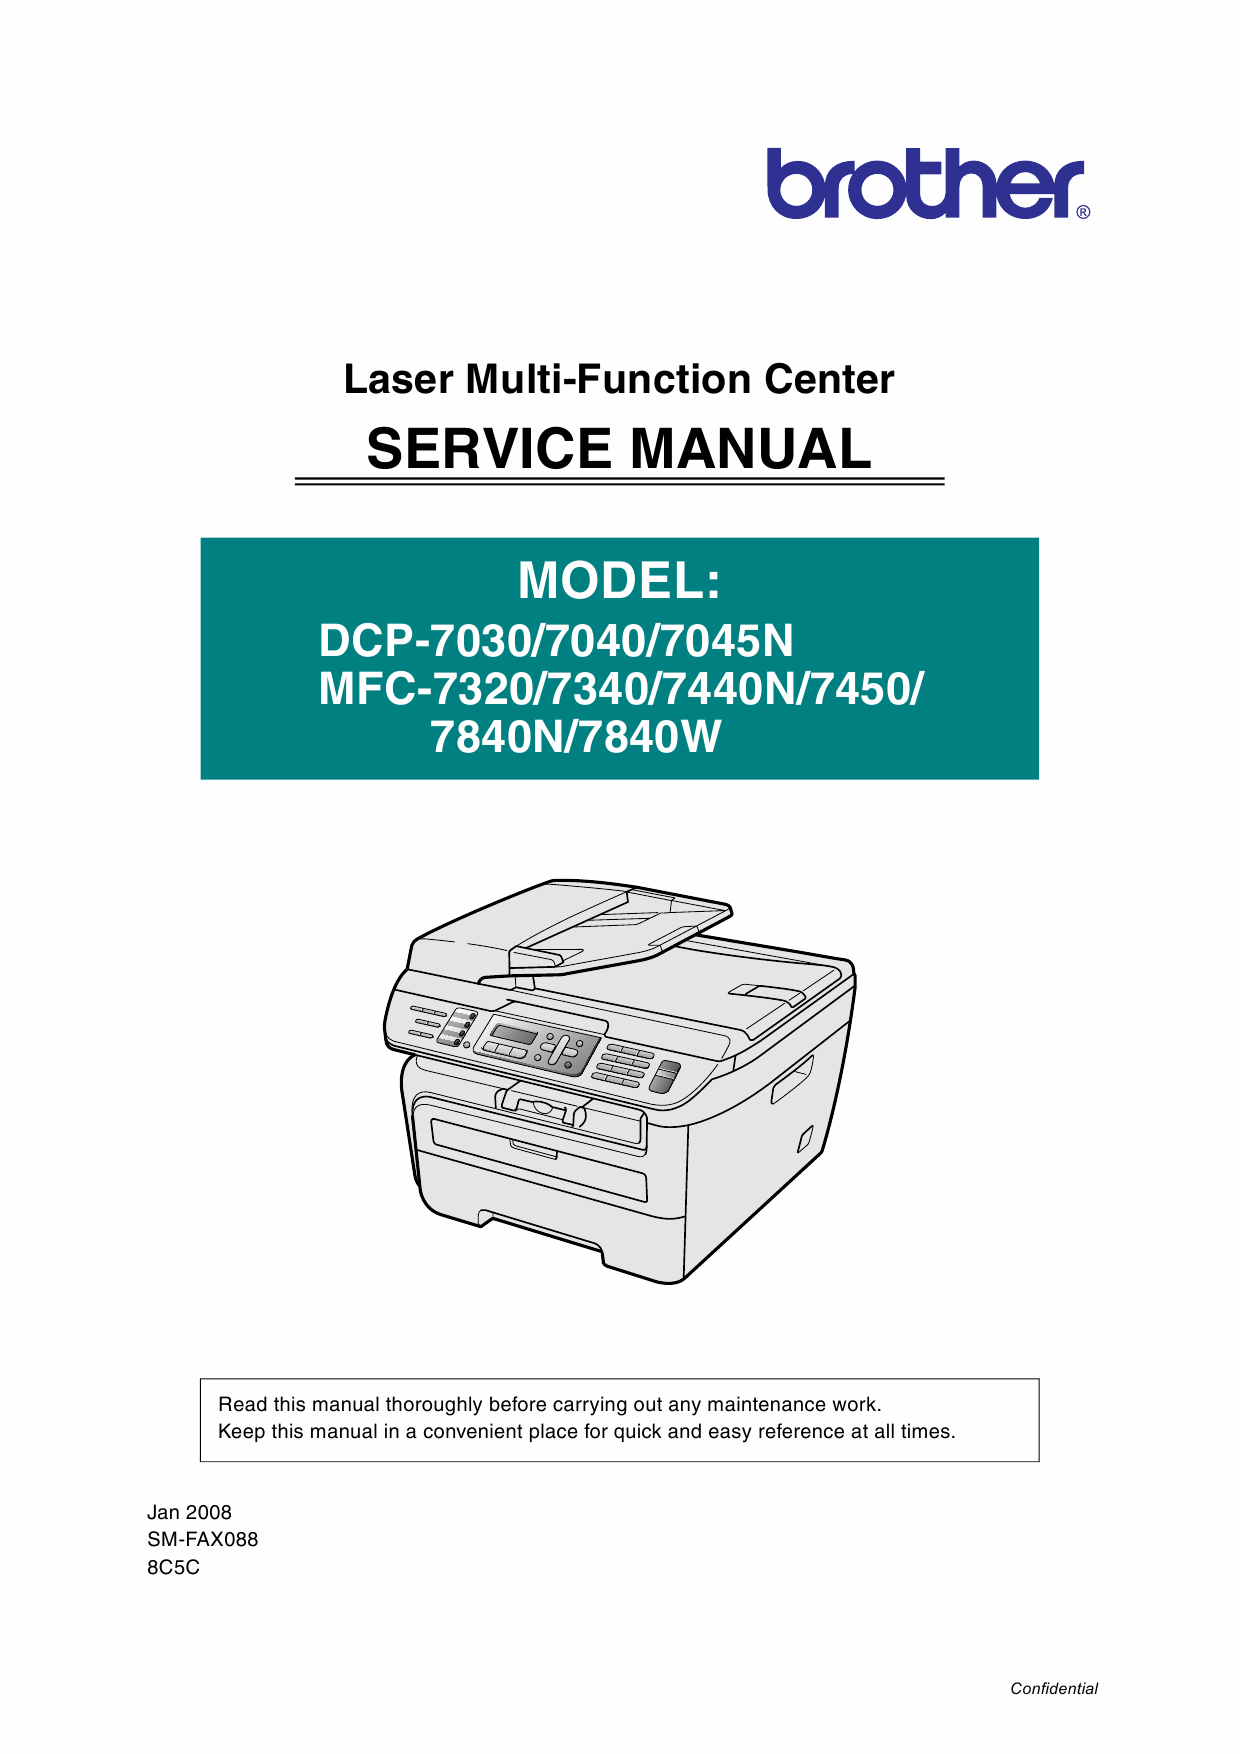 Brother Laser-MFC 7320 7340 7440 7450 7840 N-W DCP7030 7040 7050N Service Manual-1